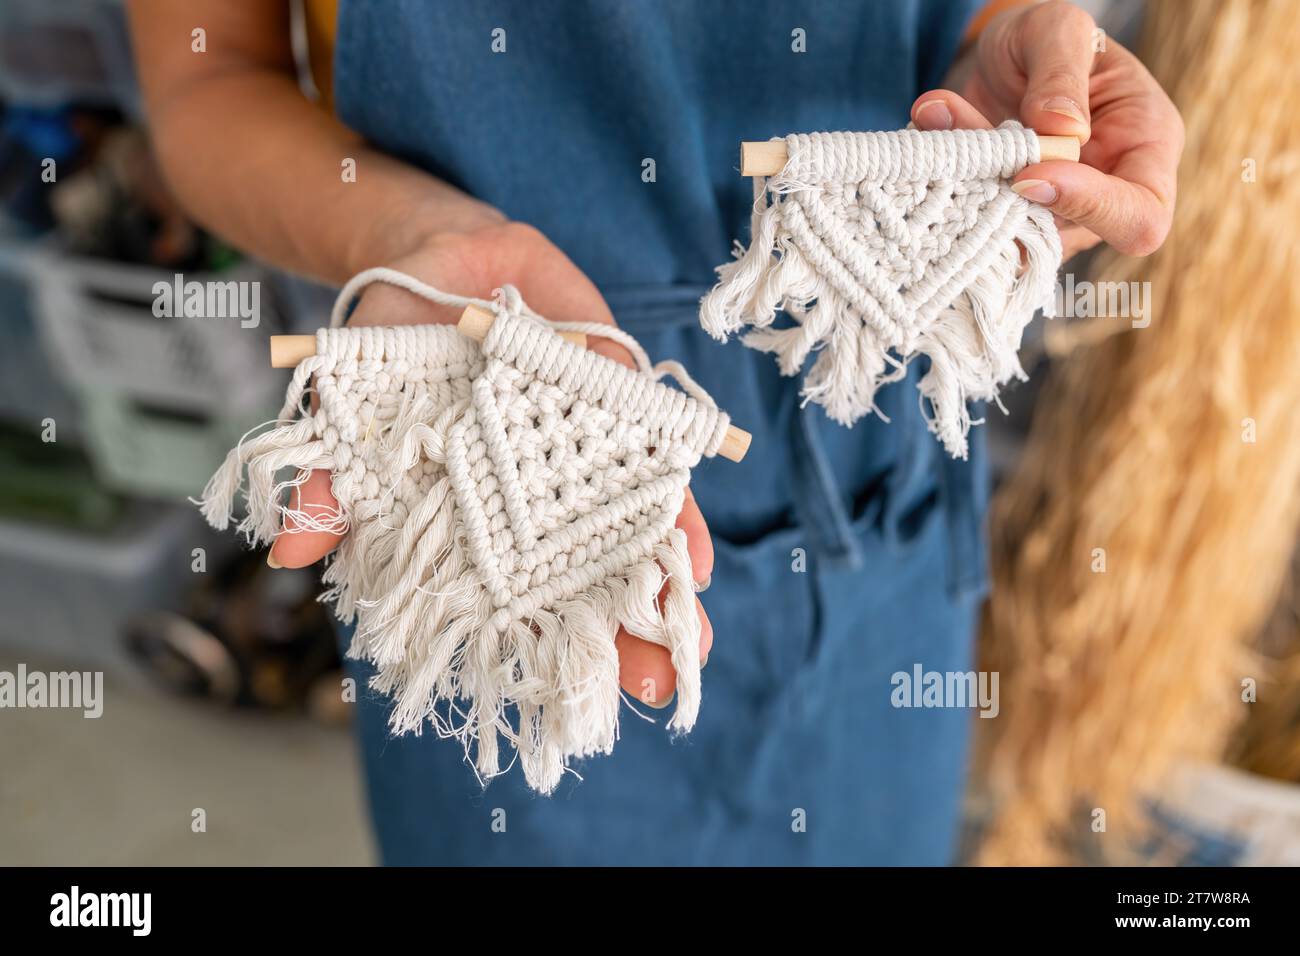 Close-up of a person holding two small macrame wall hangings Stock Photo